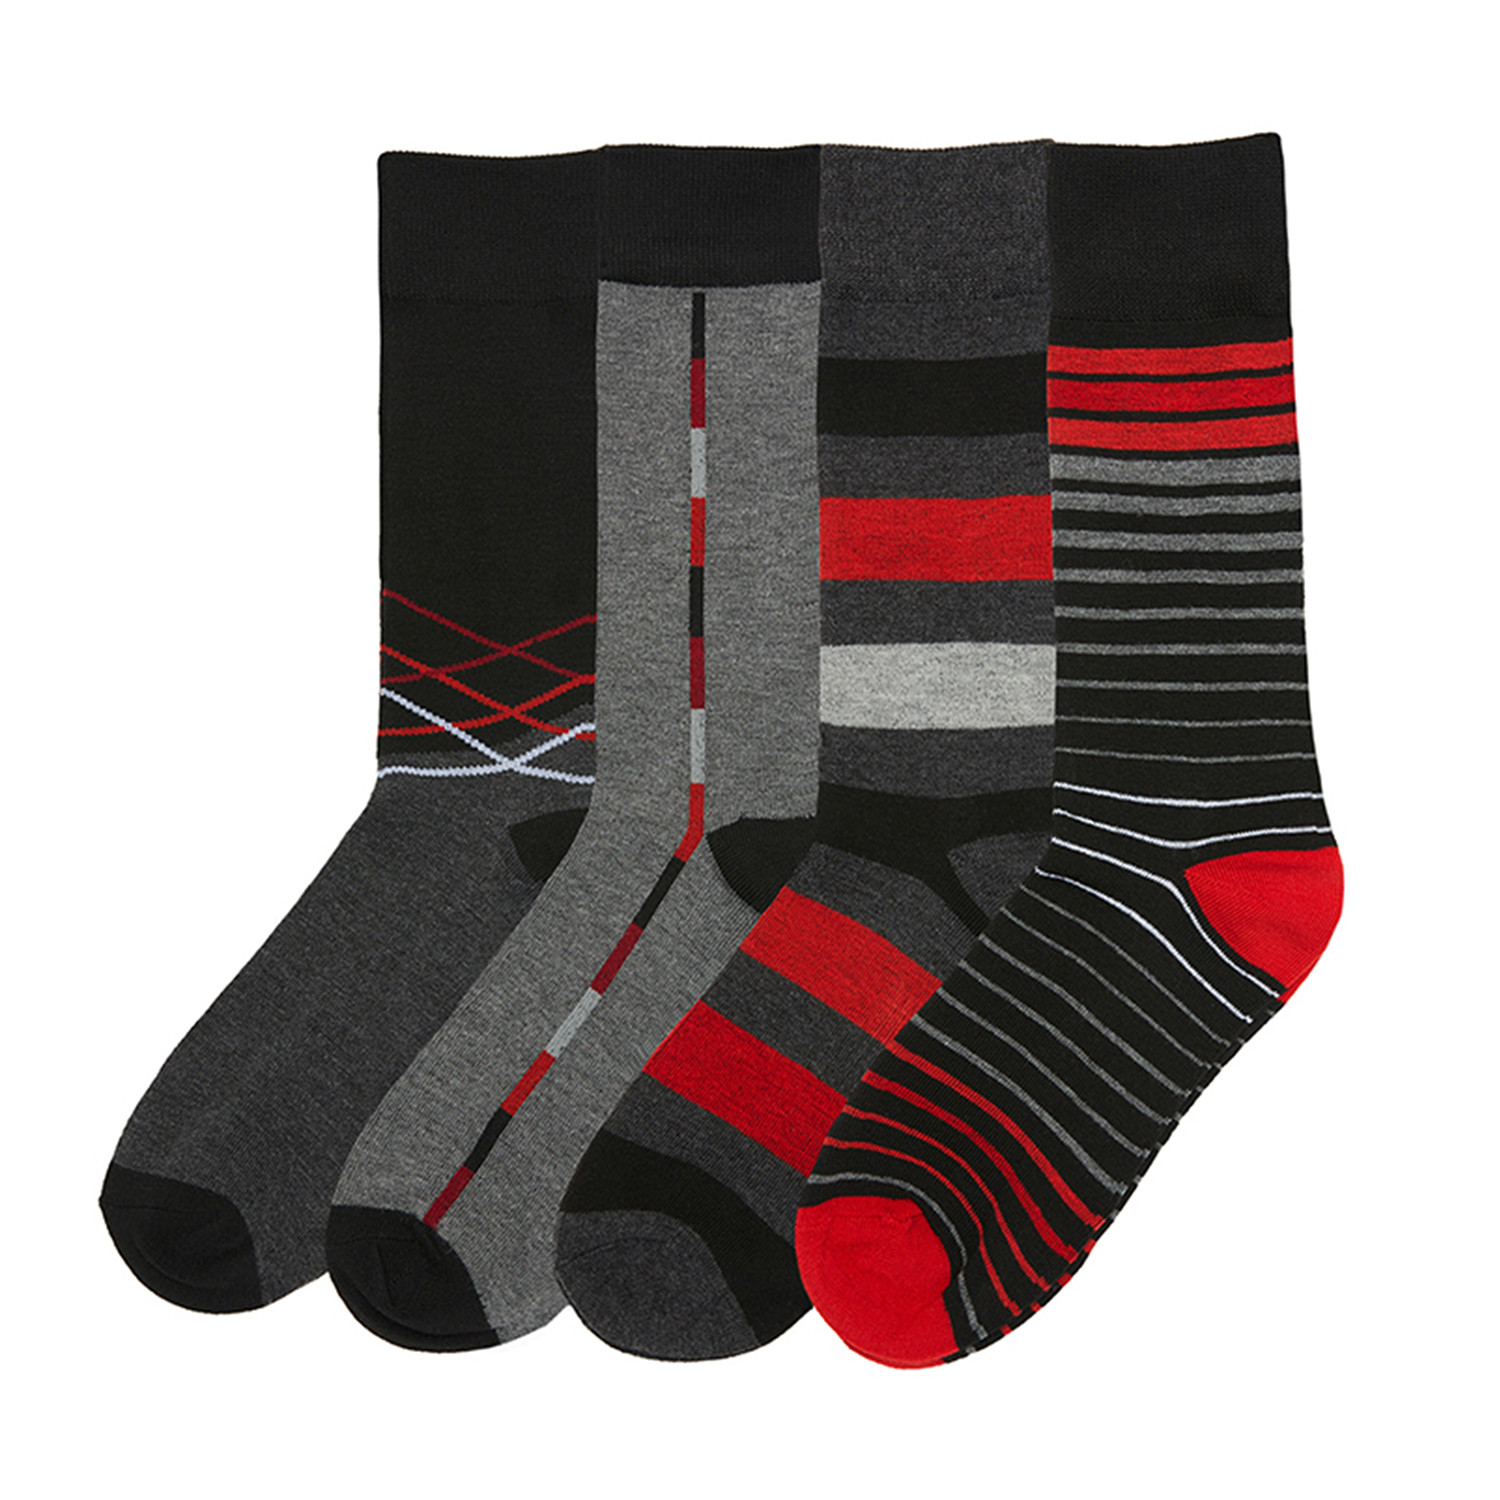 Allover Socks // Black + Grey + Red // Pack of 4 - Basic Outfitters ...